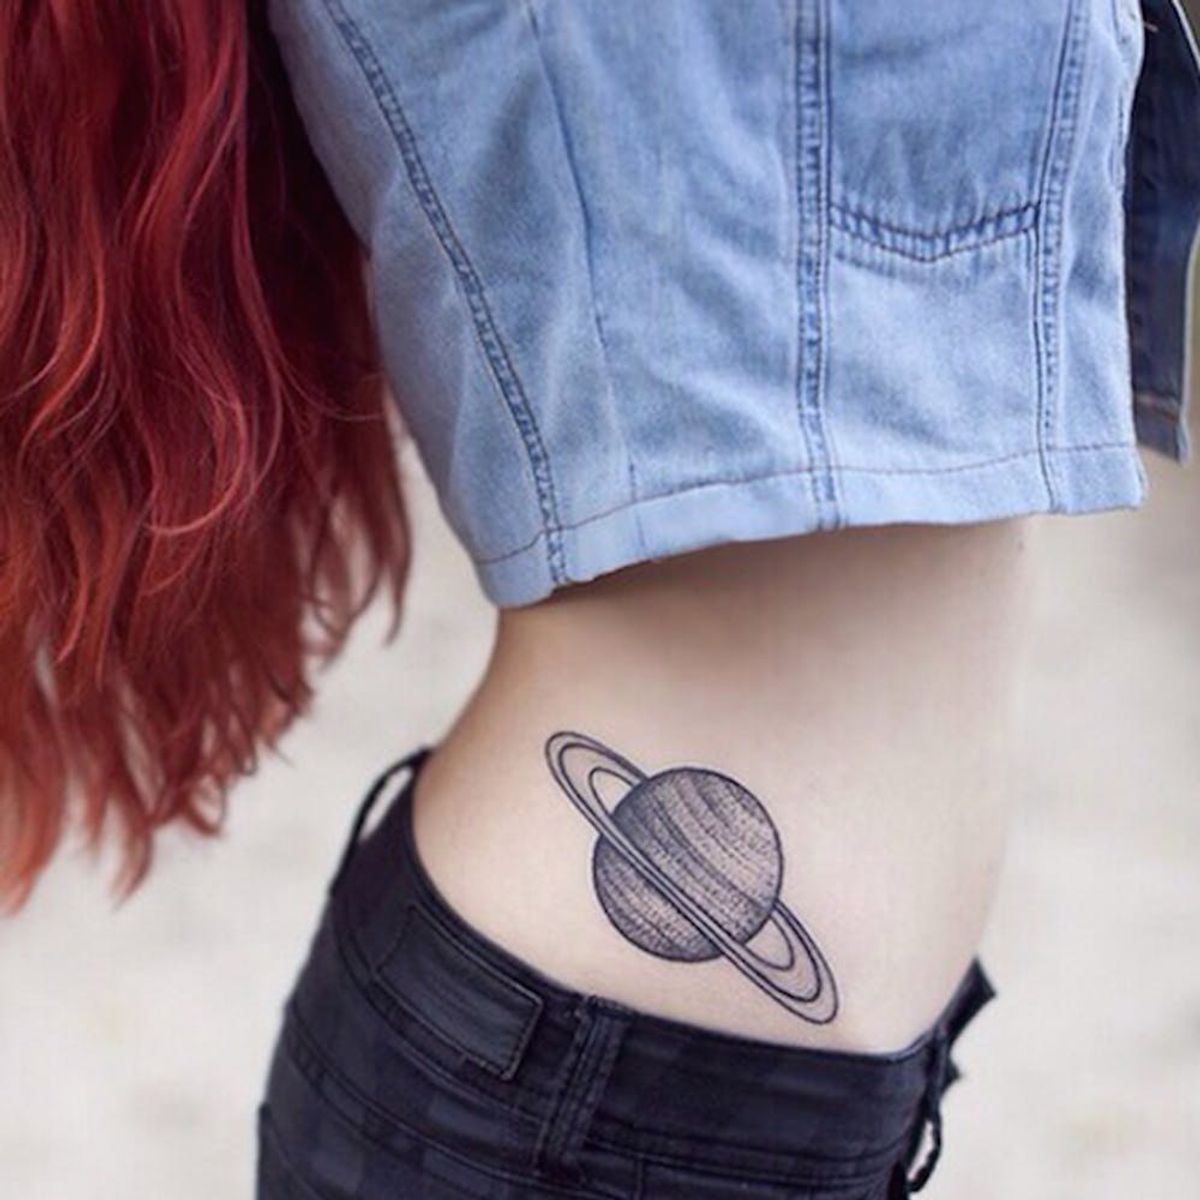 14 Galaxy-Inspired Tattoos That Are Out of This World